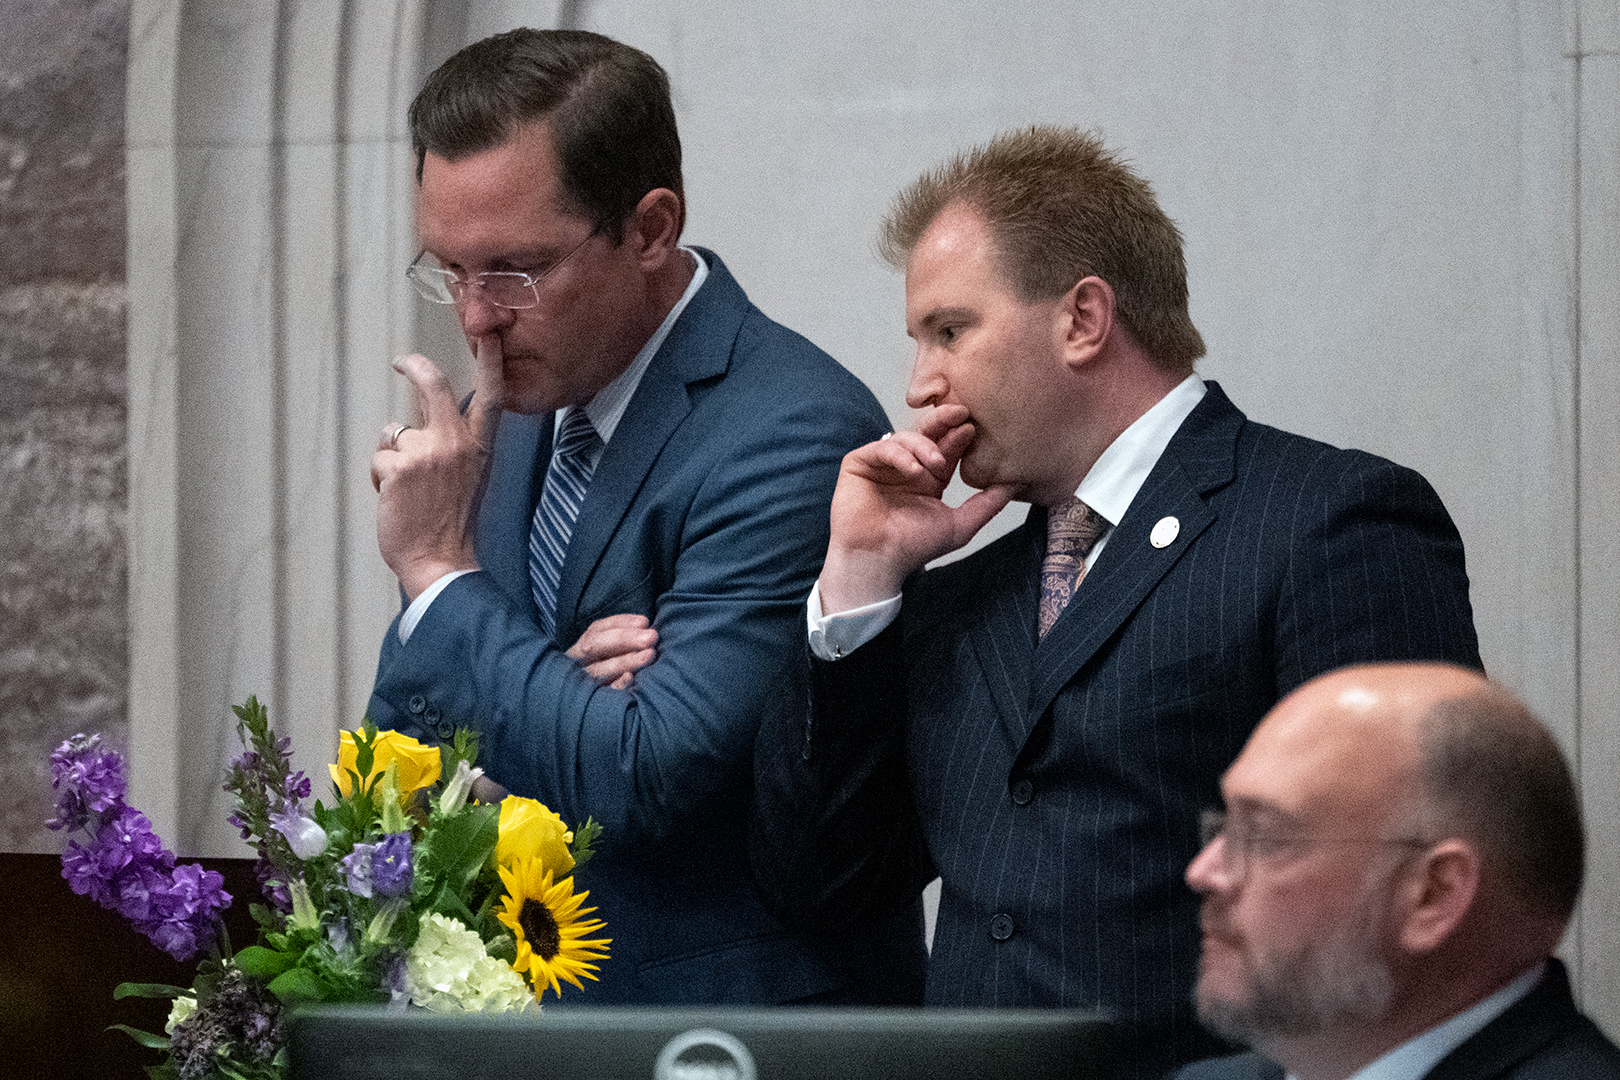 House Speaker Cameron Sexton talks with Rep. William Lamberth during expulsion proceedings for three House Democrats on the floor of the House chamber on Thursday, April 6, in Nashville.